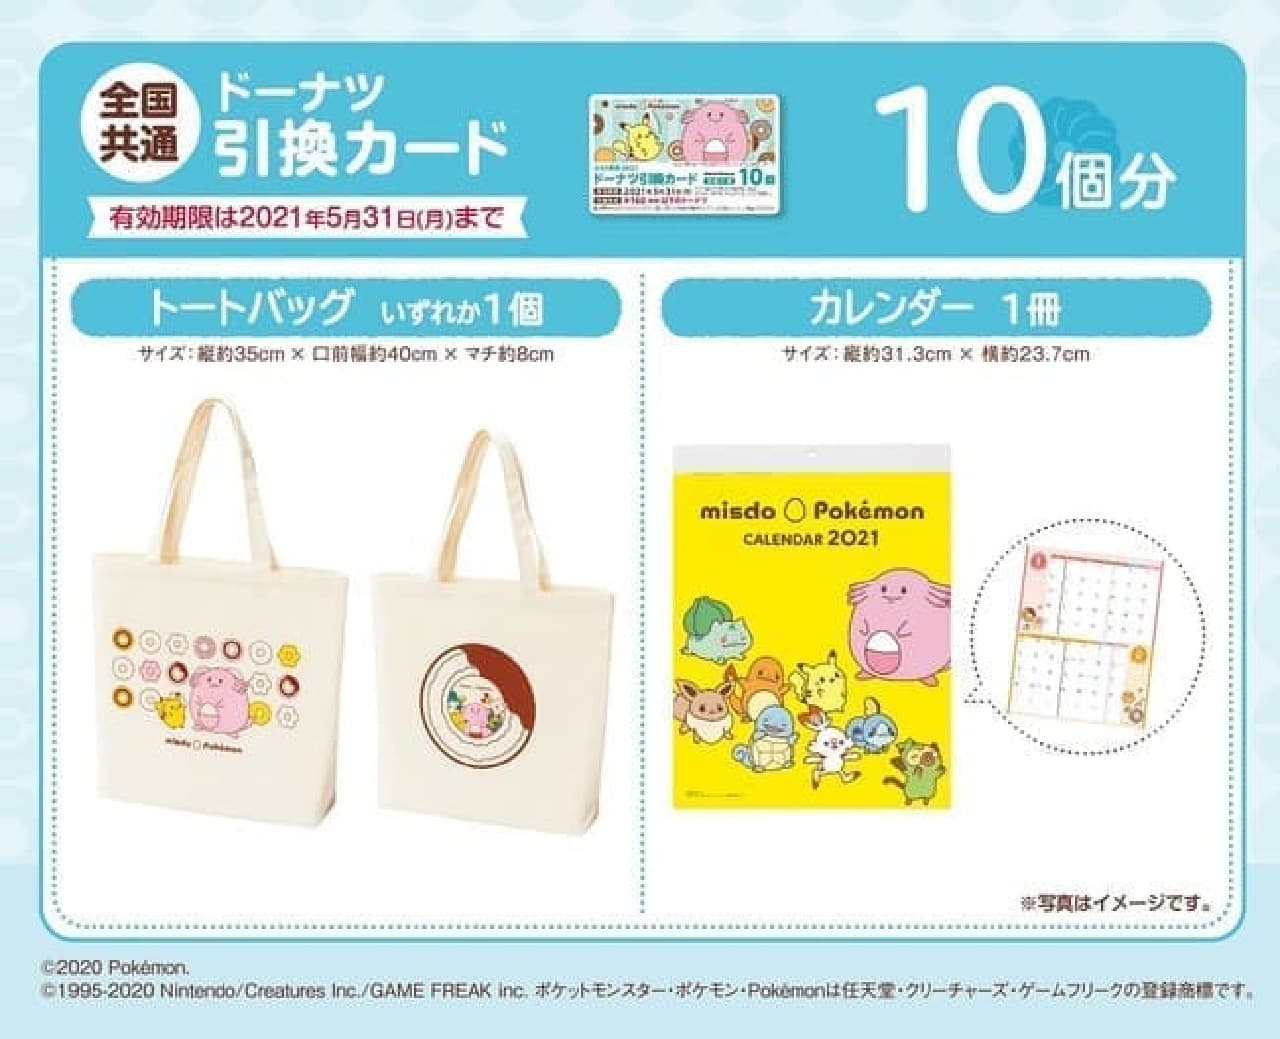 "Mister Donut Lucky Bag 2021" in collaboration with Pokemon